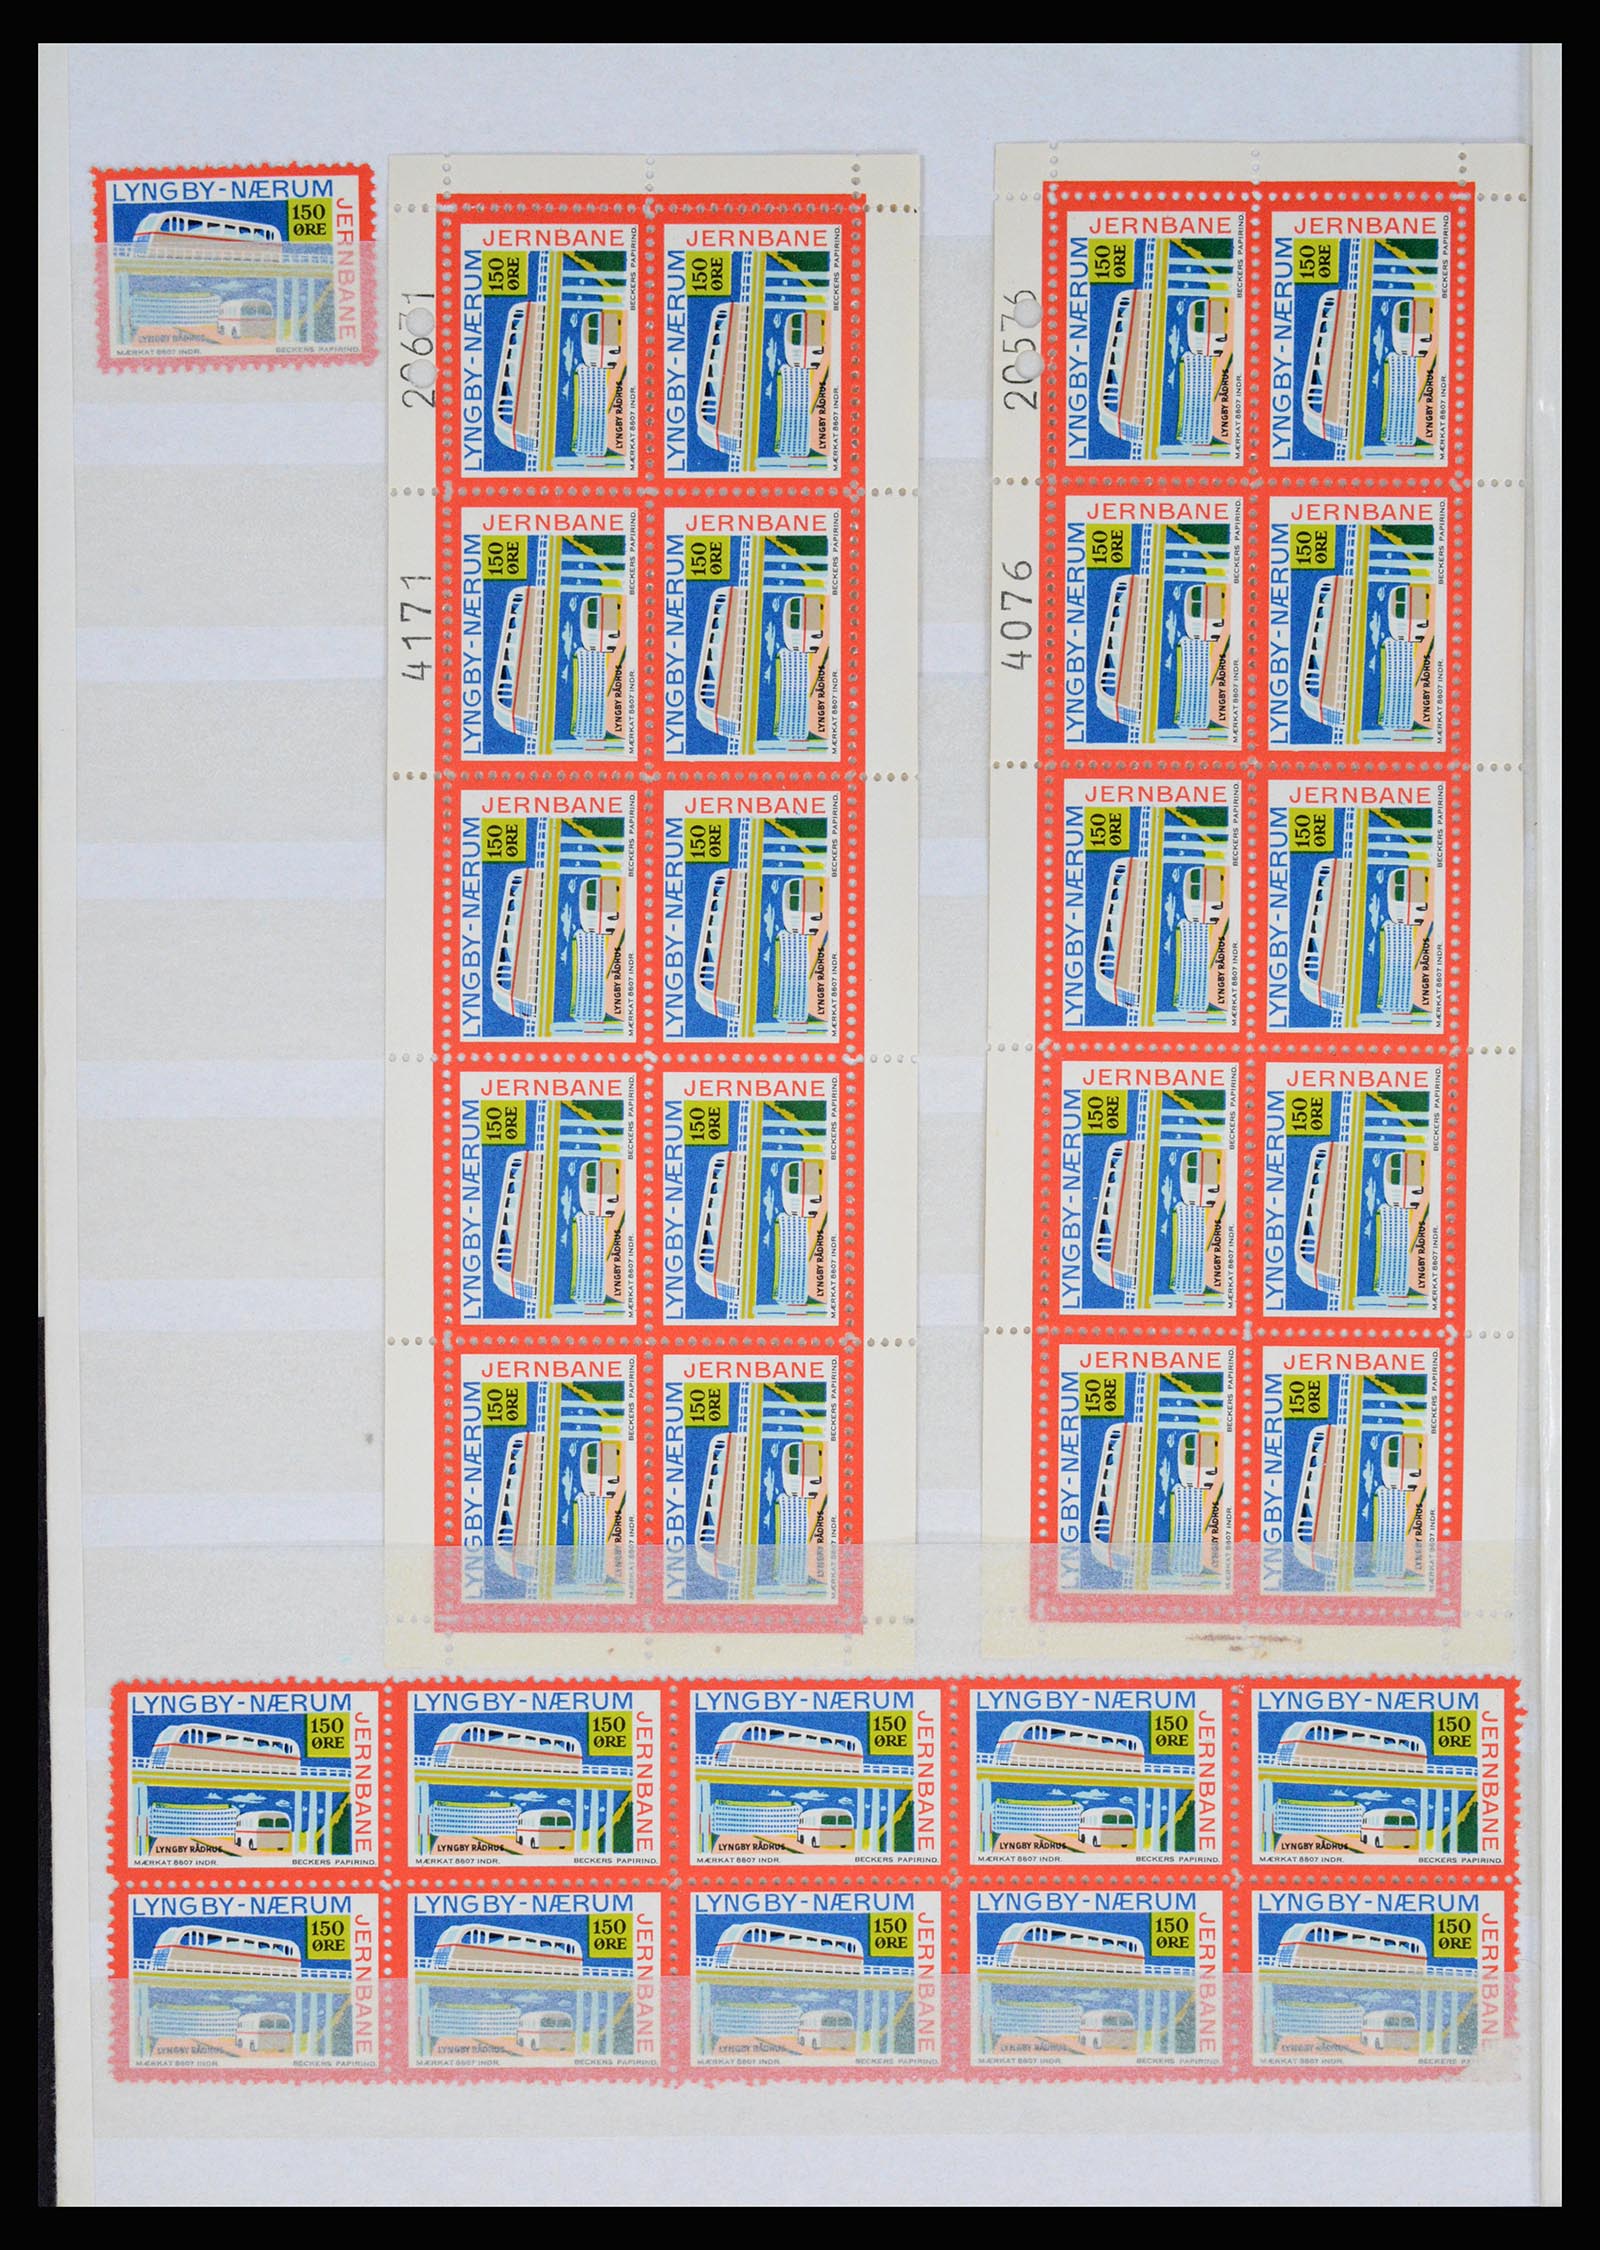 36982 050 - Stamp collection 36982 Denmark railroad stamps.